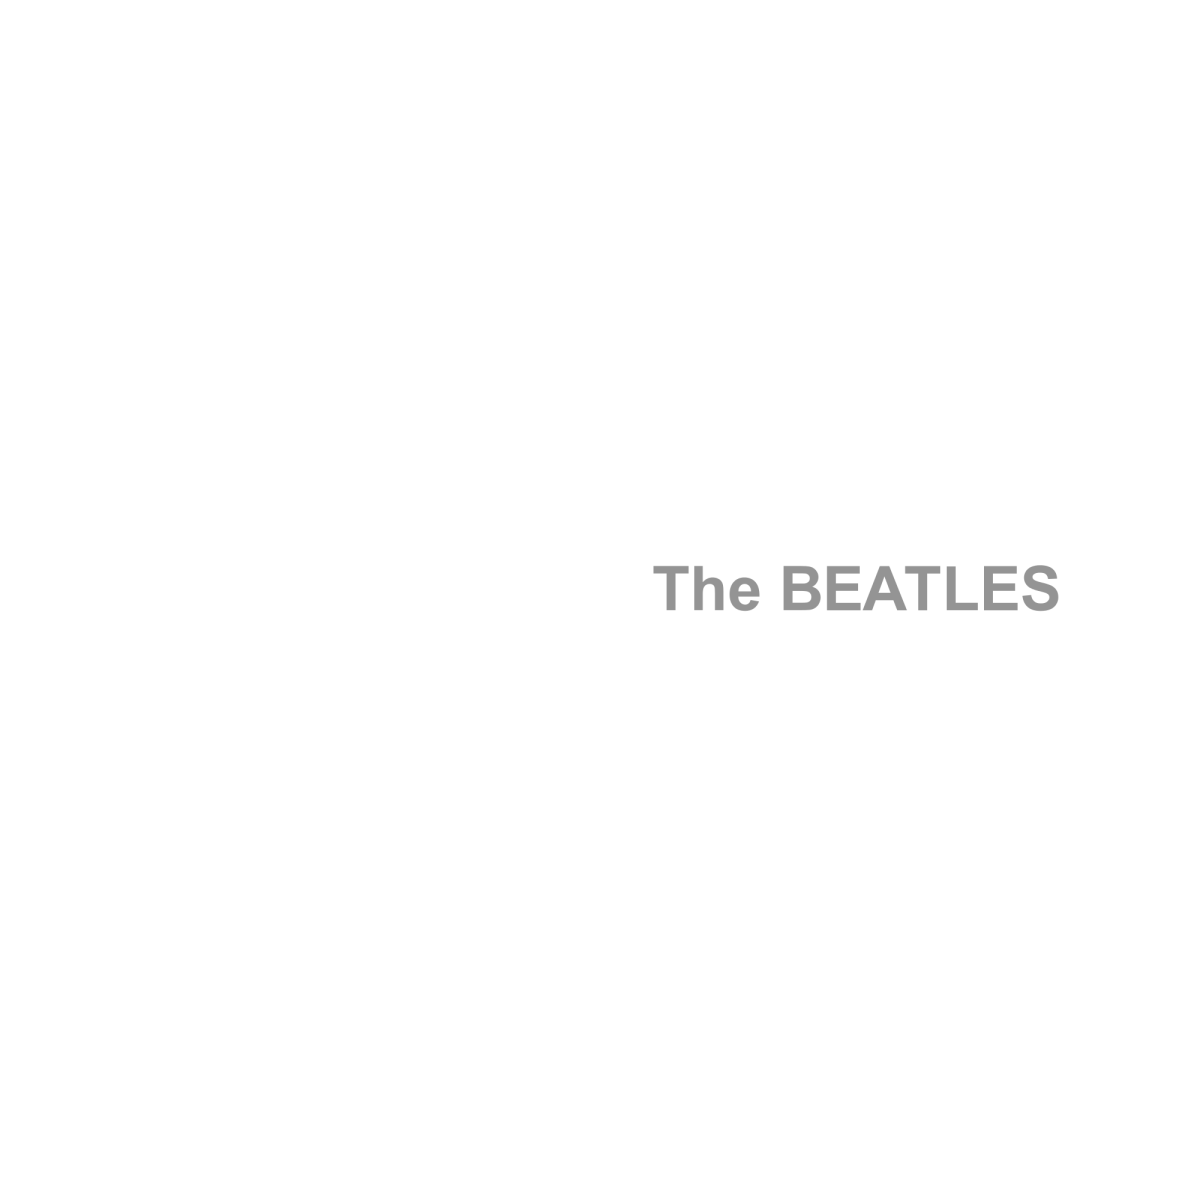 The Beatles: For all the ignorance in which I began this listening project (and which spurred me to it in the first place), I can at least say for myself that I already knew this one wasn't actually titled "The White Album" — and of its 30 tracks, surprisingly many are familiar.